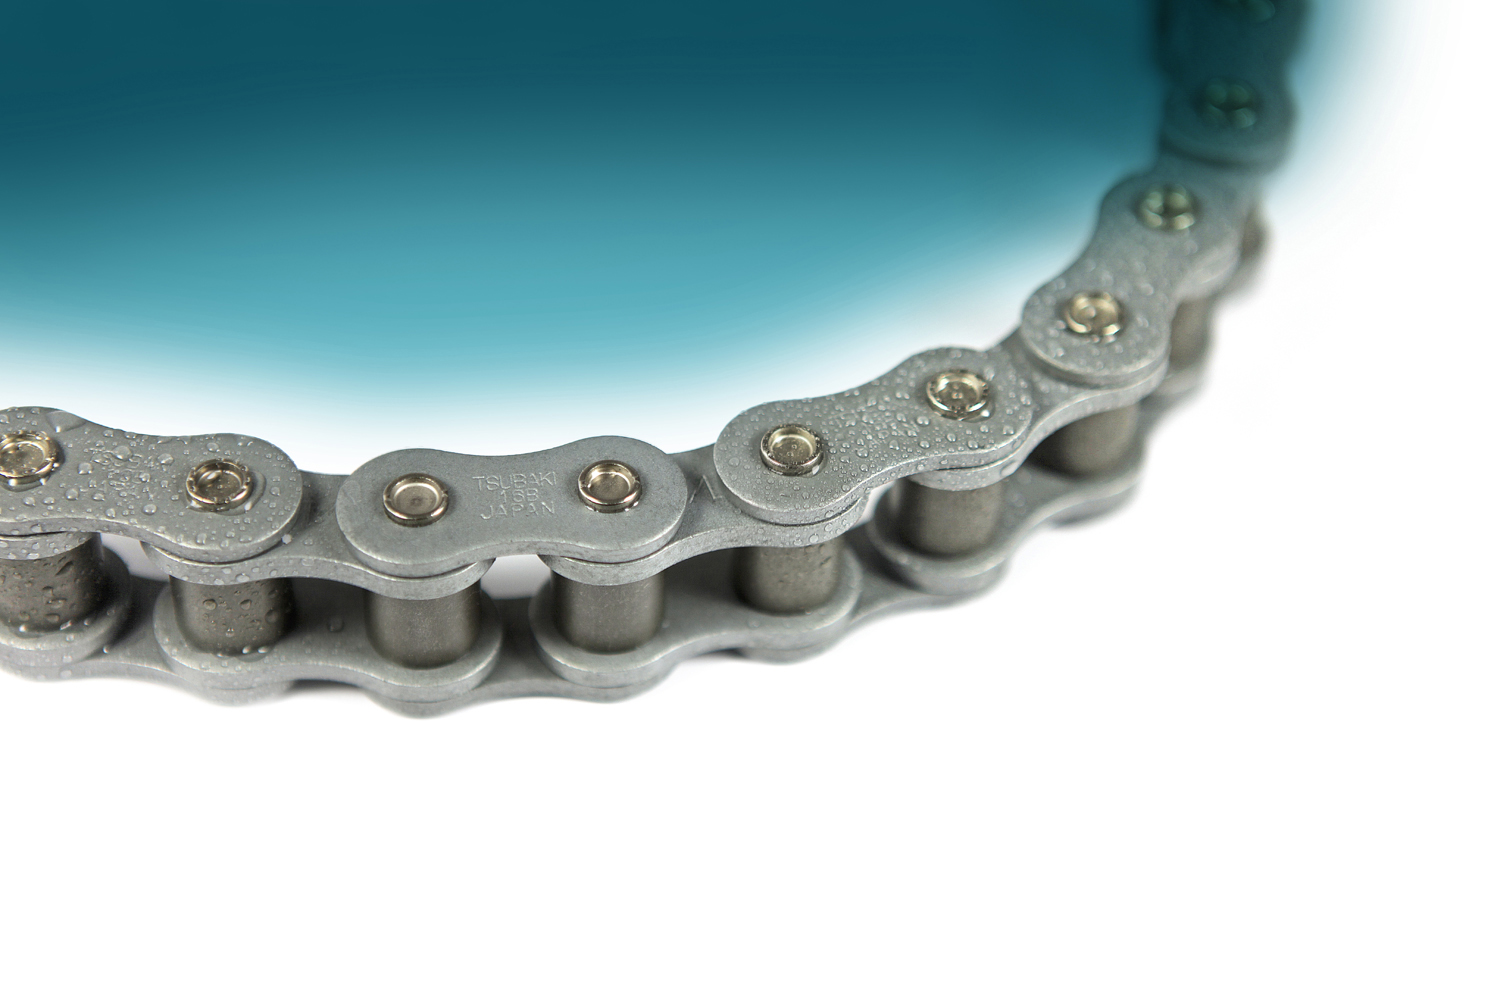 Tsubaki’s Neptune chain, the fourth and current generation of the anti-corrosion chain, includes a special coating as well as a resin applied over the carbon-steel base chain.